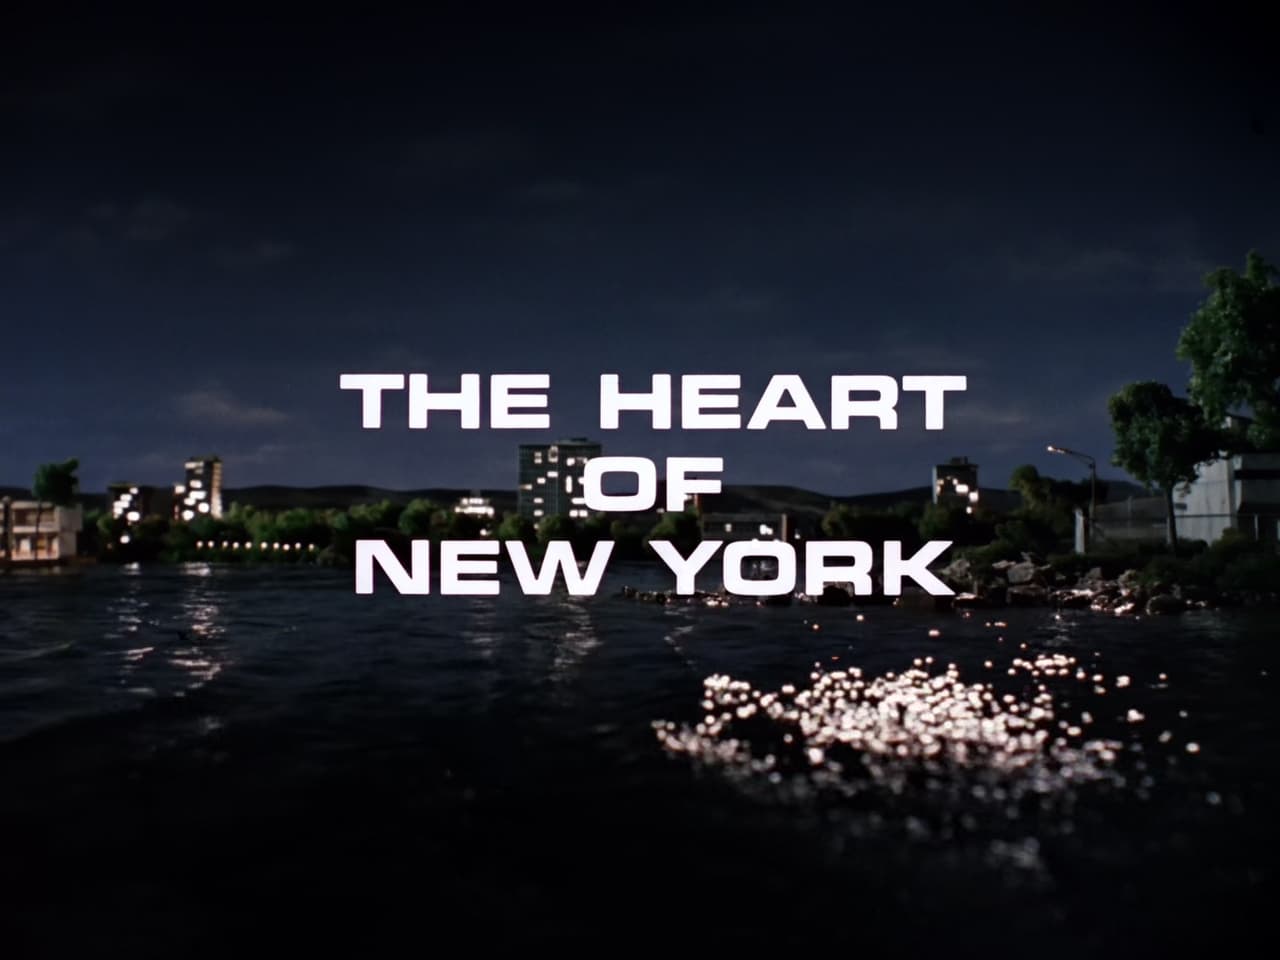 The Heart of New York